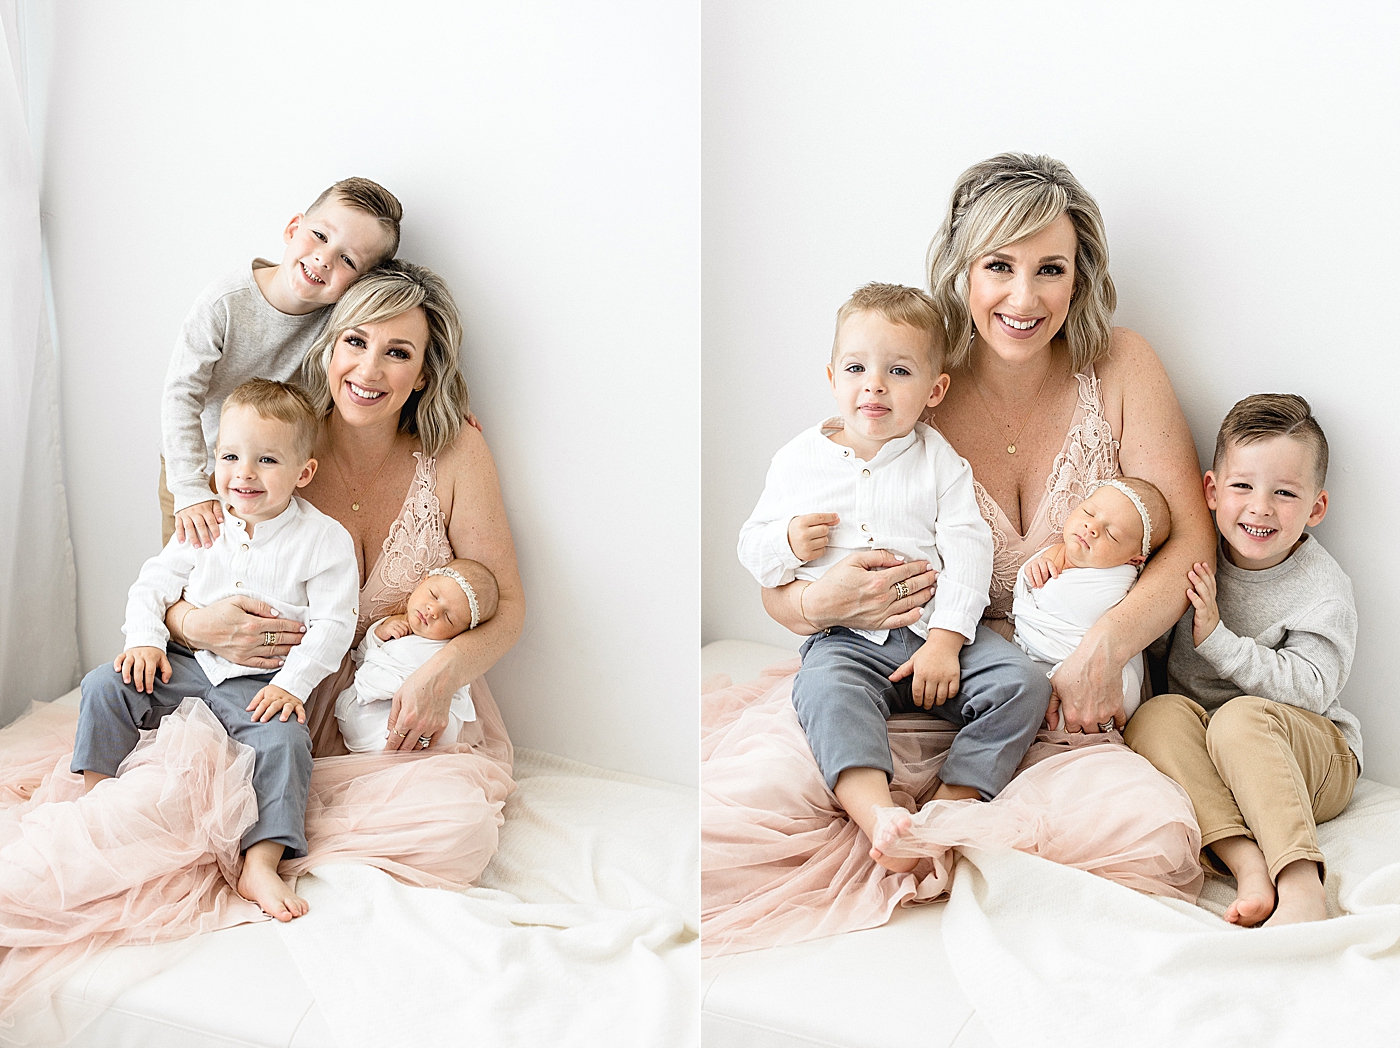 Baby Girl's Newborn Session in the Studio. Photos by Brittany Elise Photography.